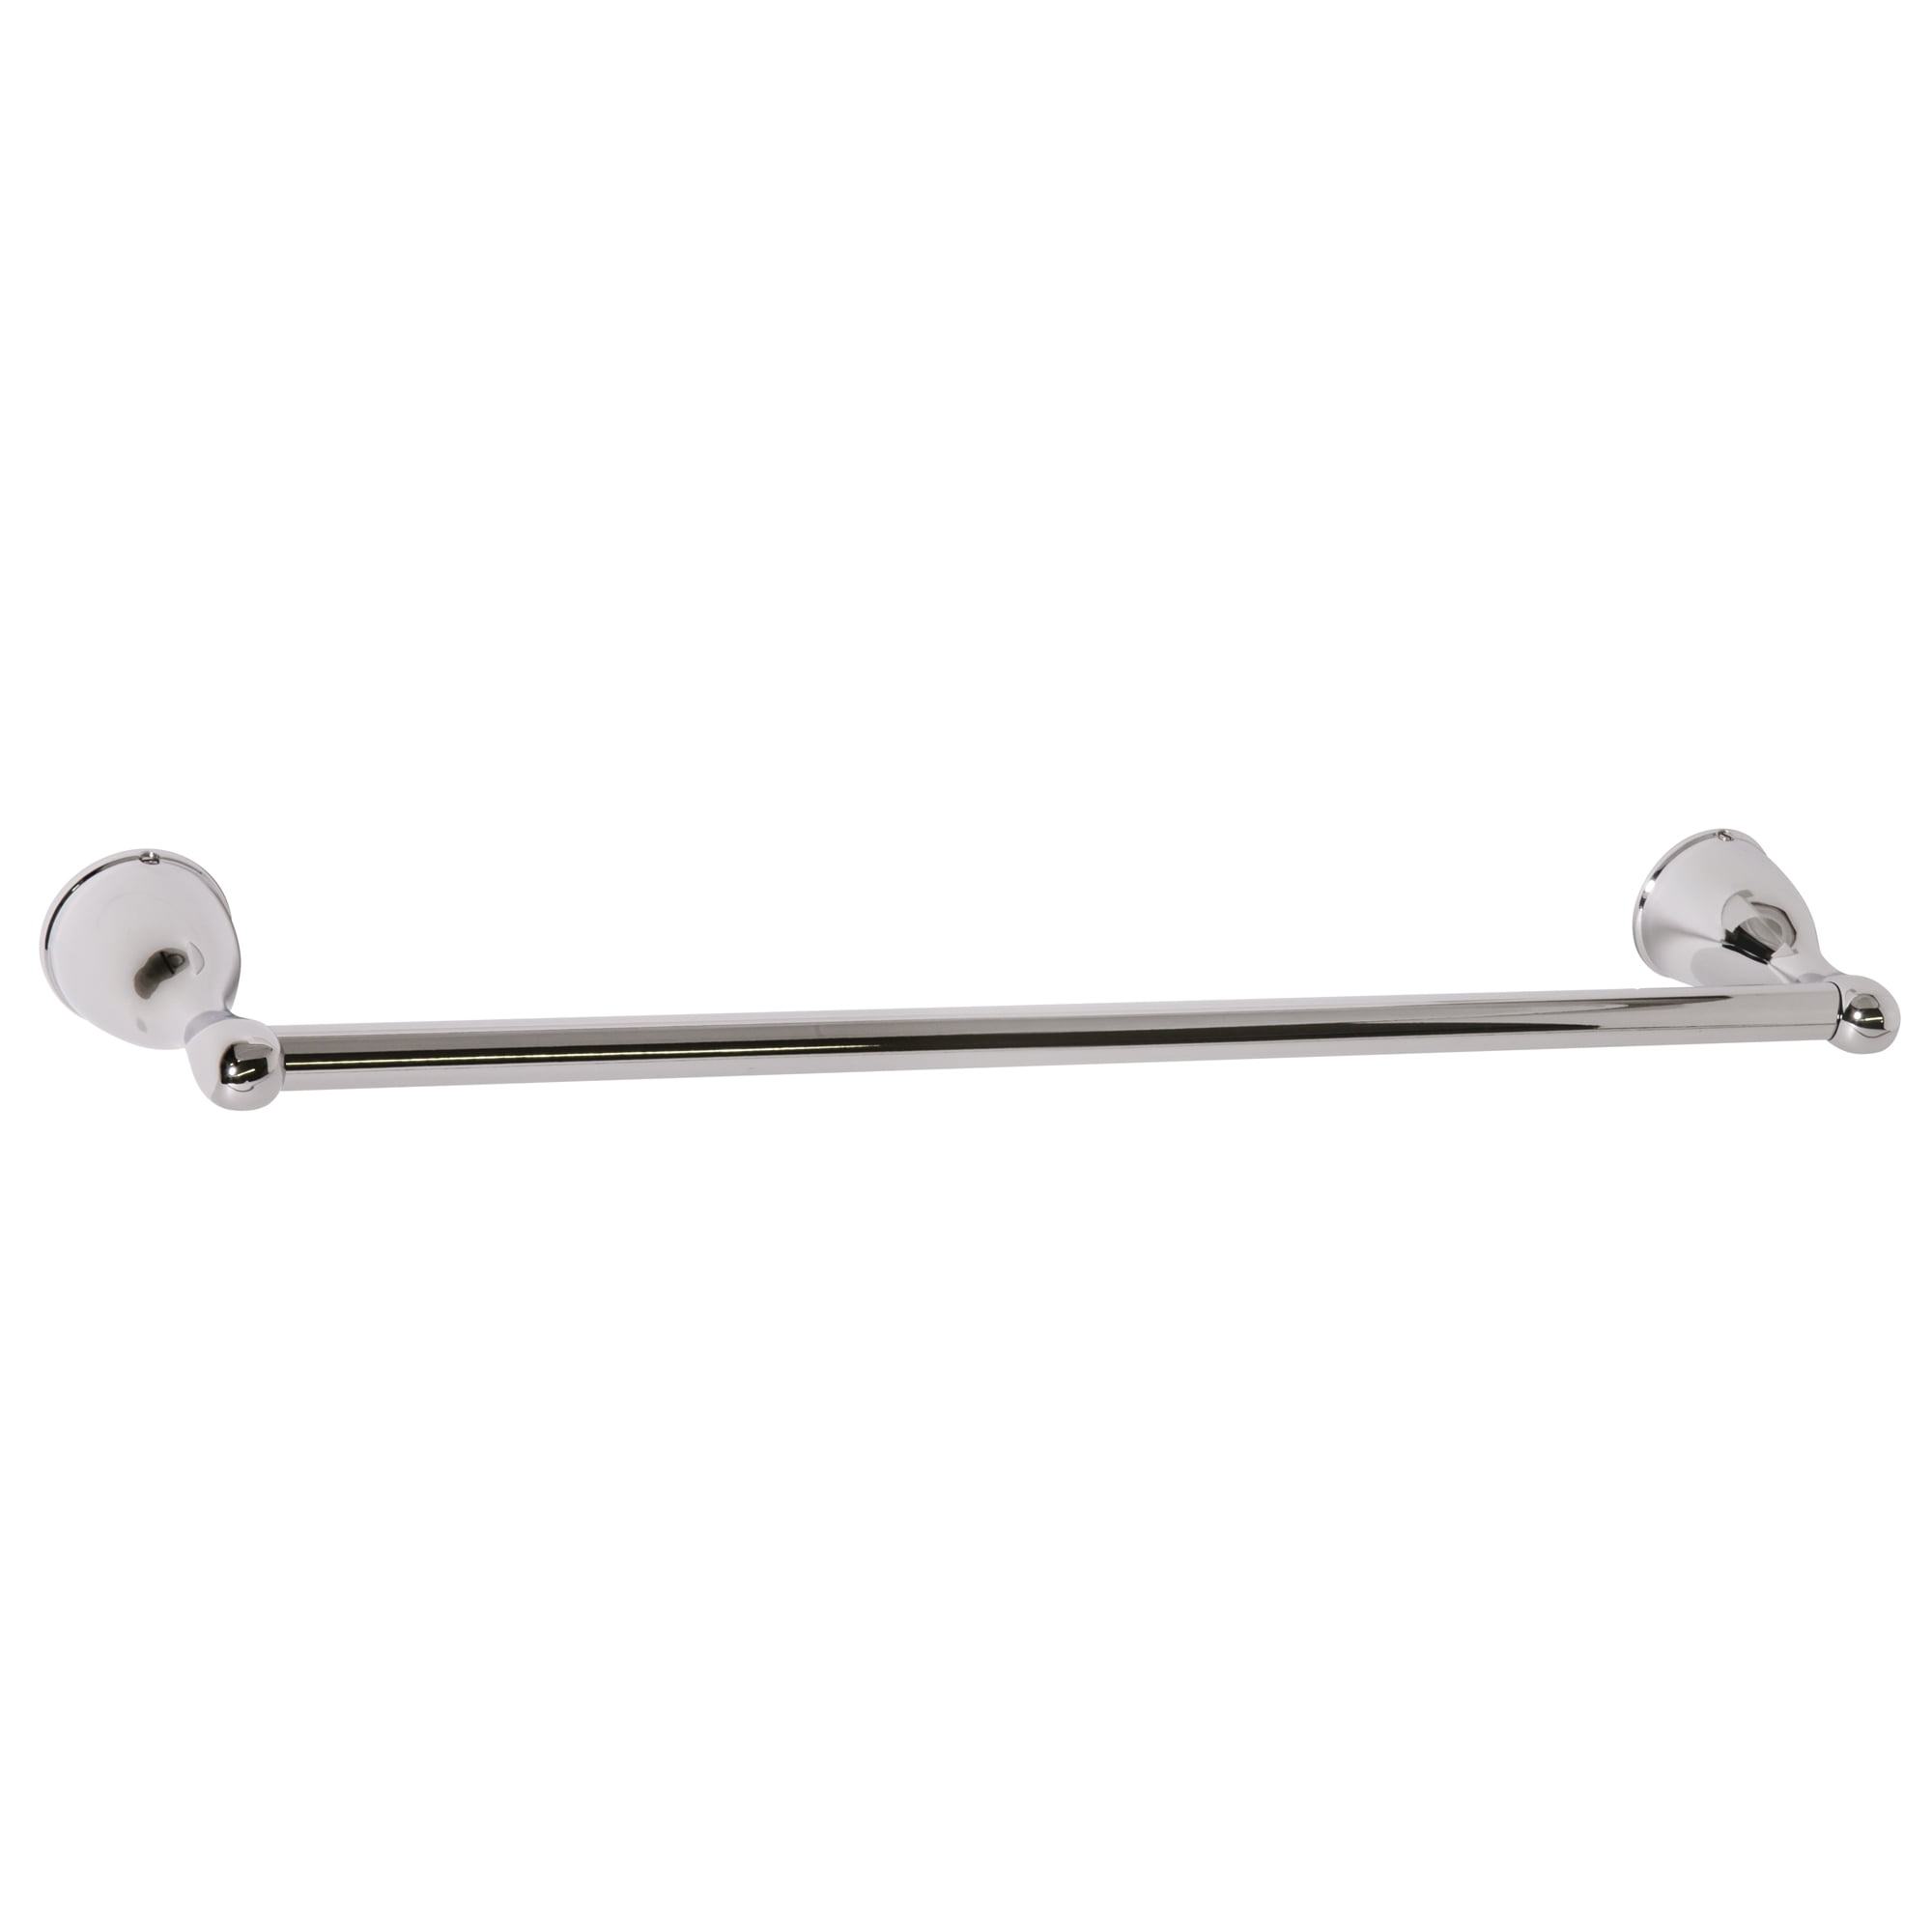 iDesign Twigz Metal Over the Cabinet Dish and Hand Towel Bar Holder for Kitchen, 